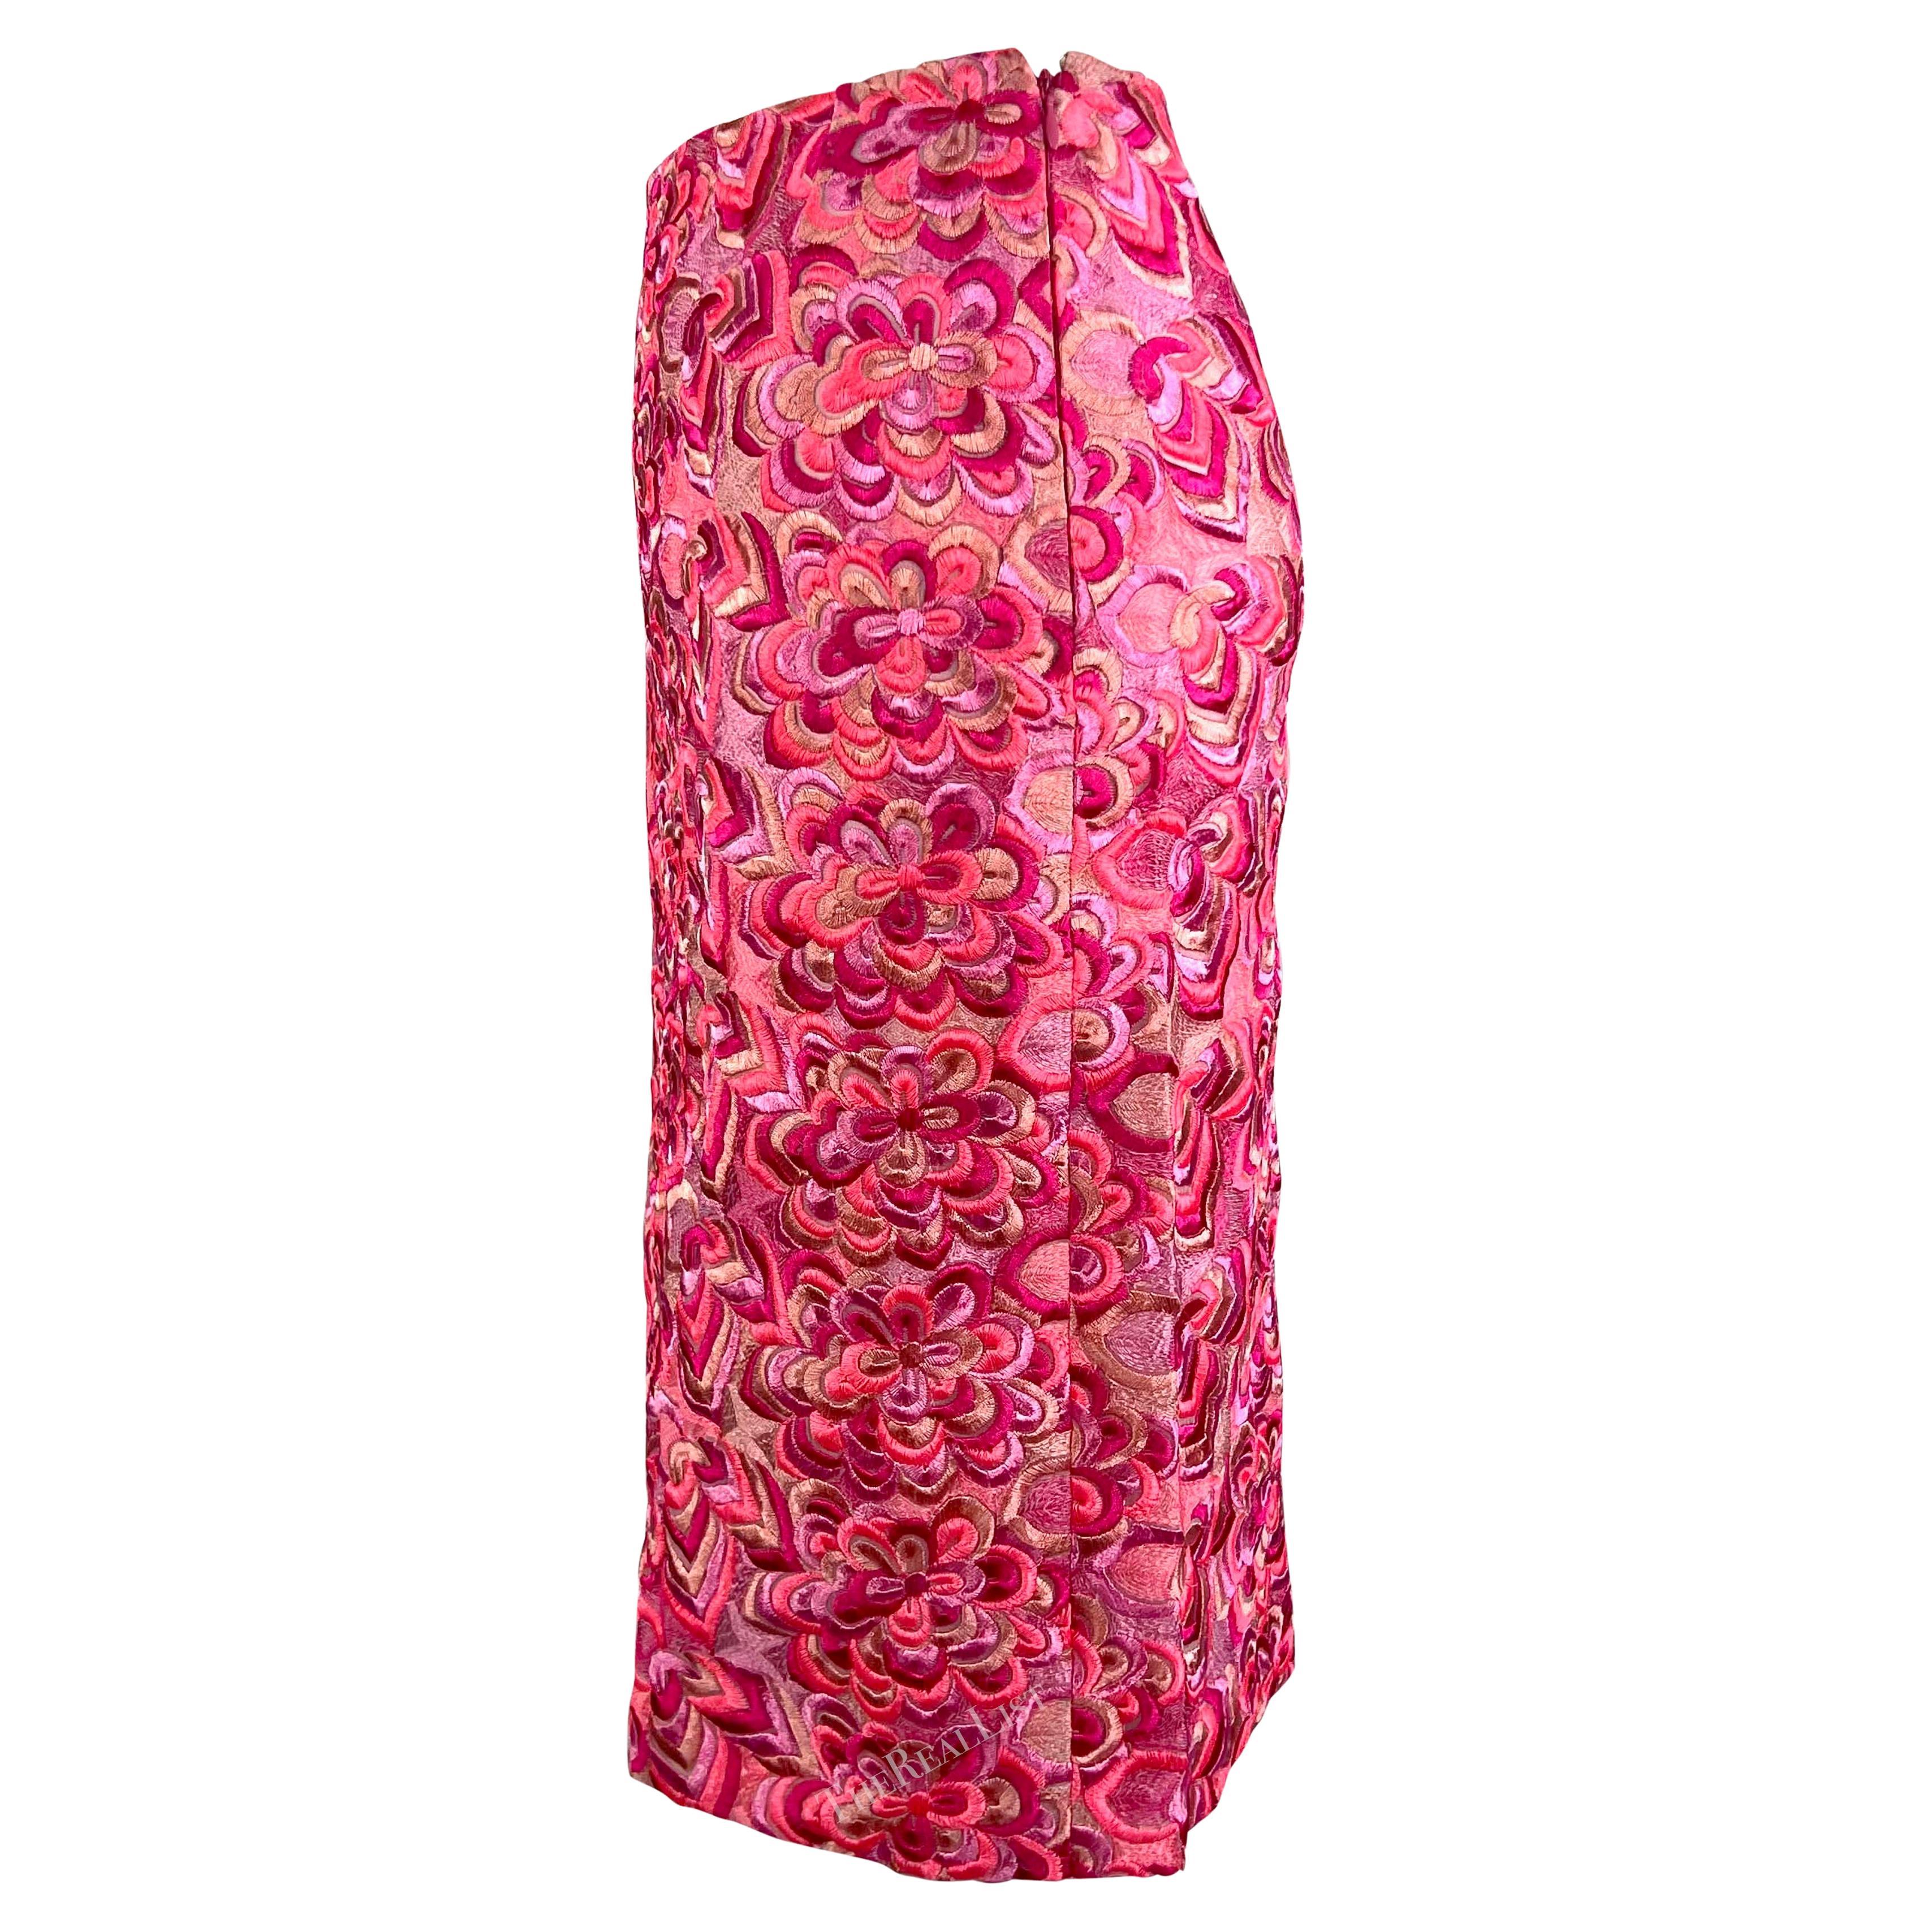 S/S 2000 Gianni Versace by Donatella Versace for Gianni Versace for Gianni Versace for Gianni Versace for Gianni Versace by Donatella Neon Pink Floral Embroidered Skirt Pour femmes en vente